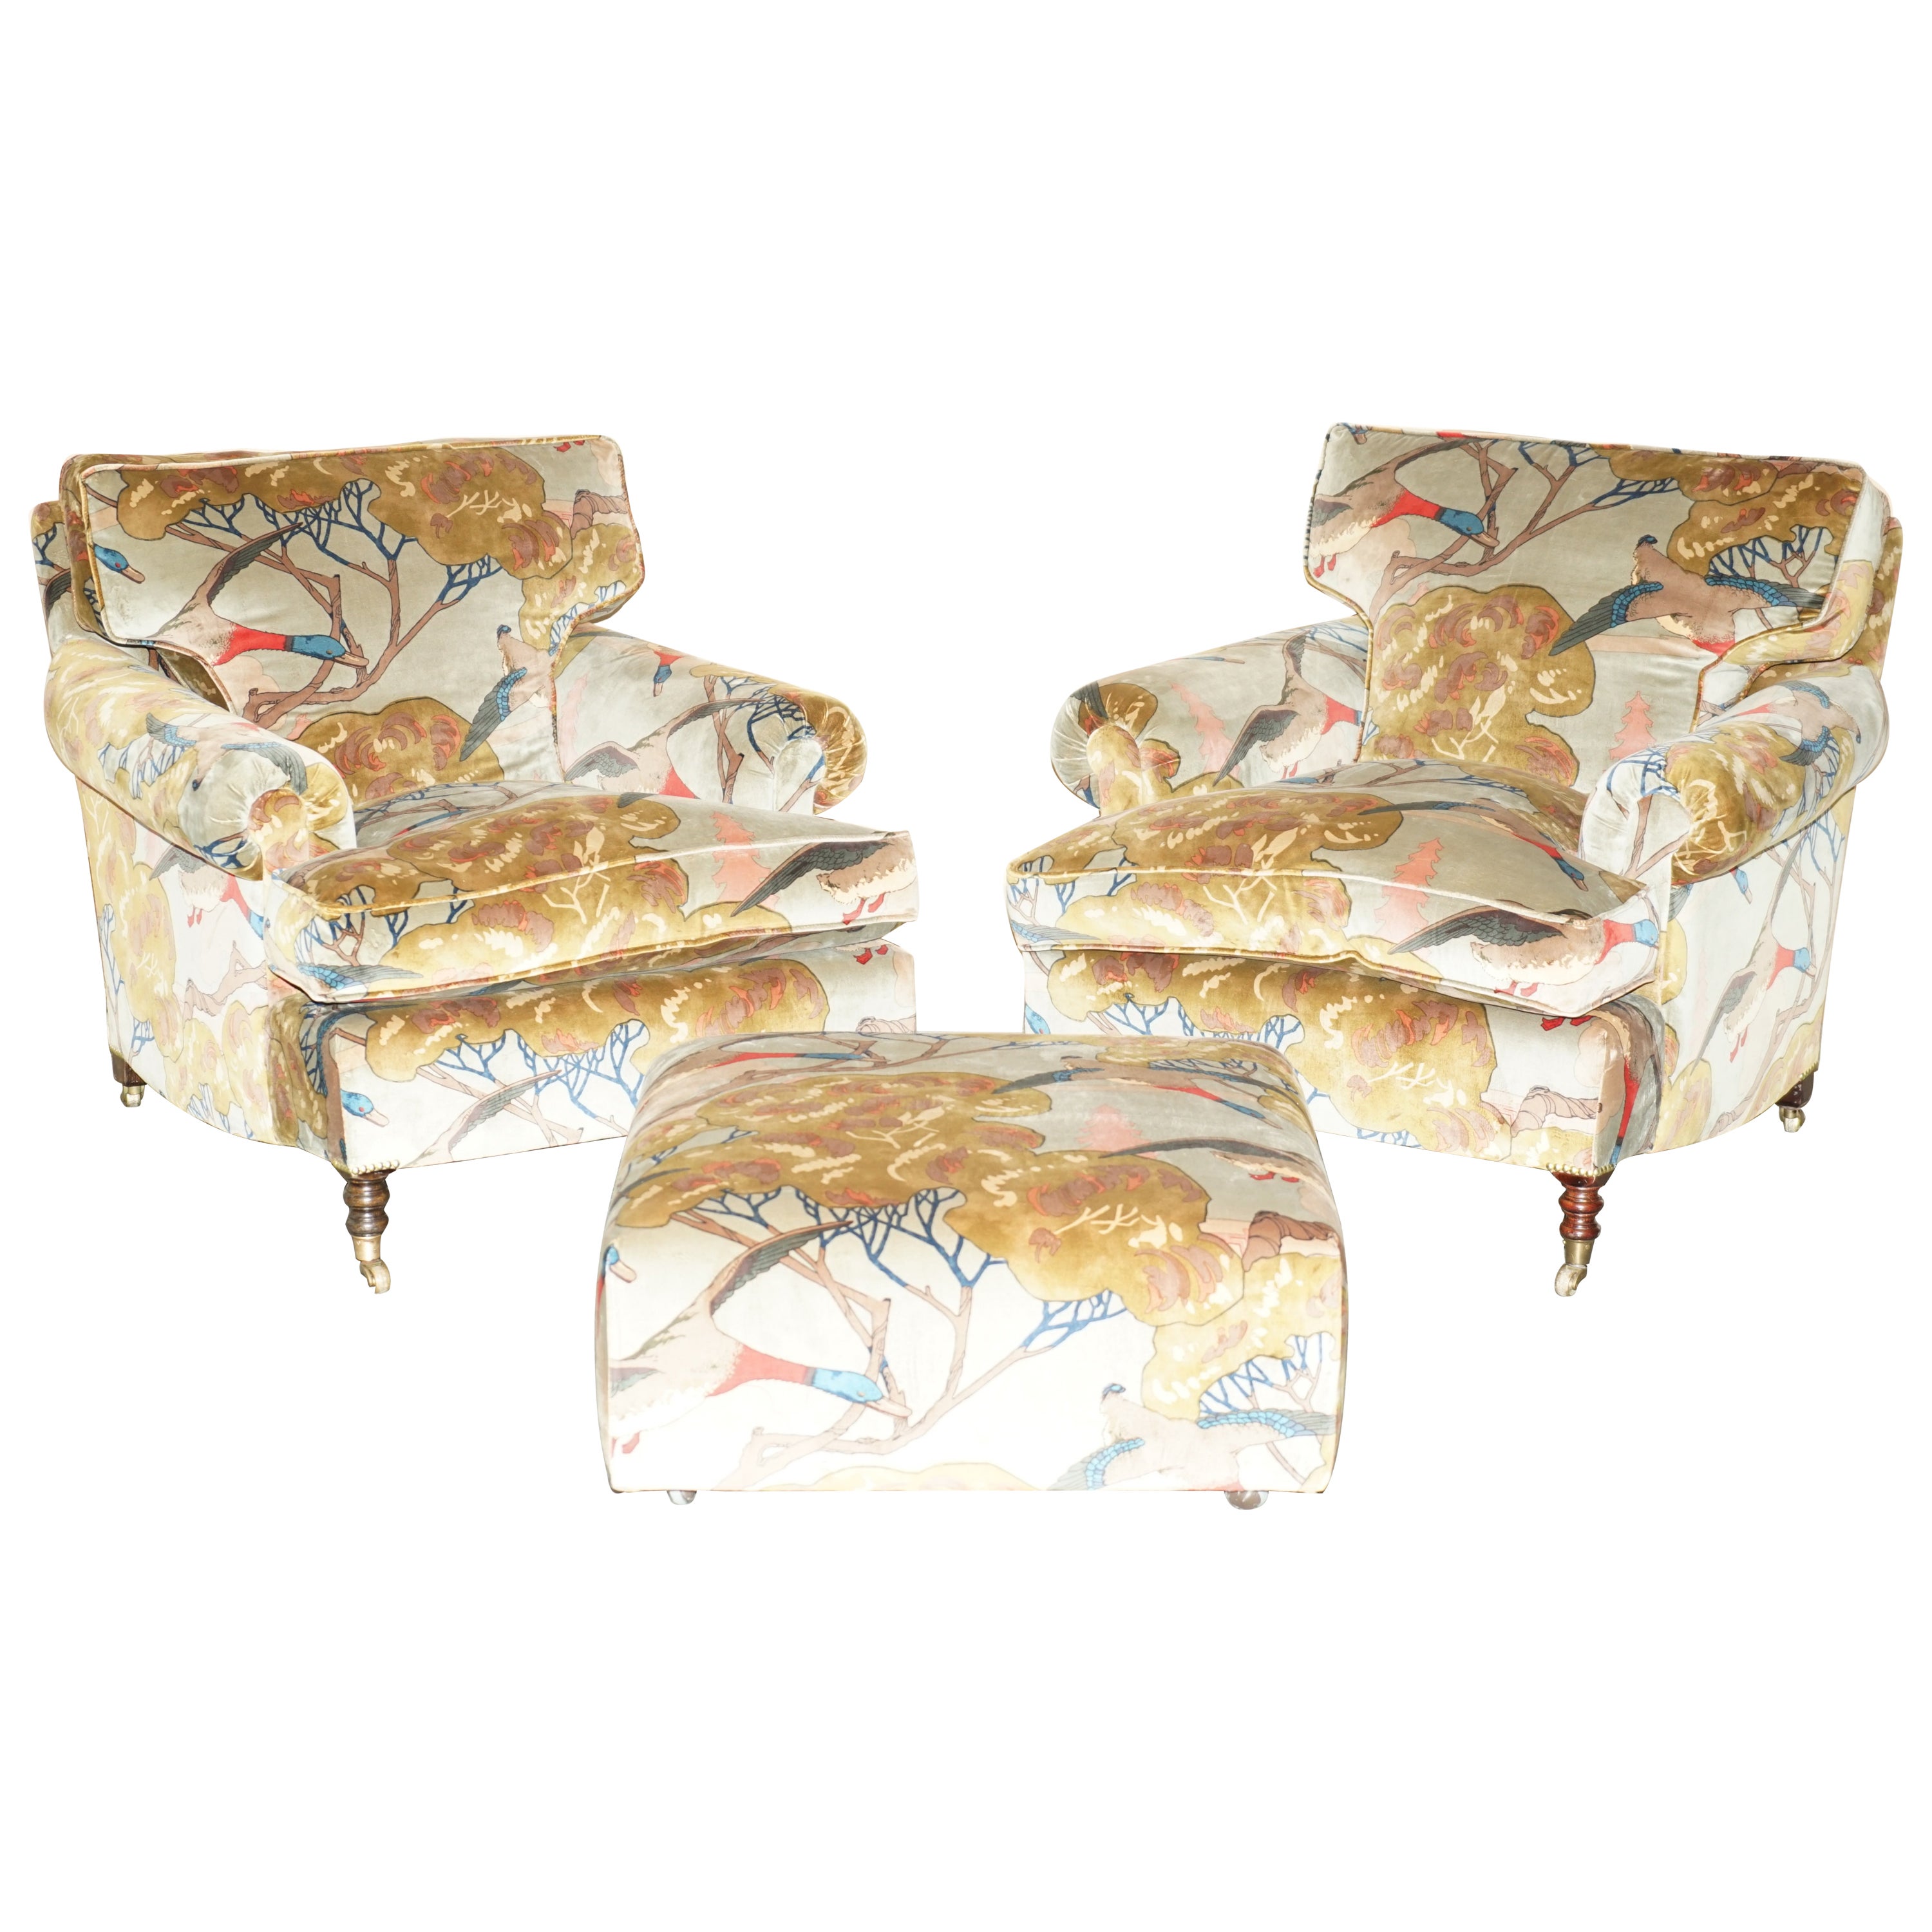 New Pair of George Smith Flying Ducks Armchairs & Ottoman Footstool